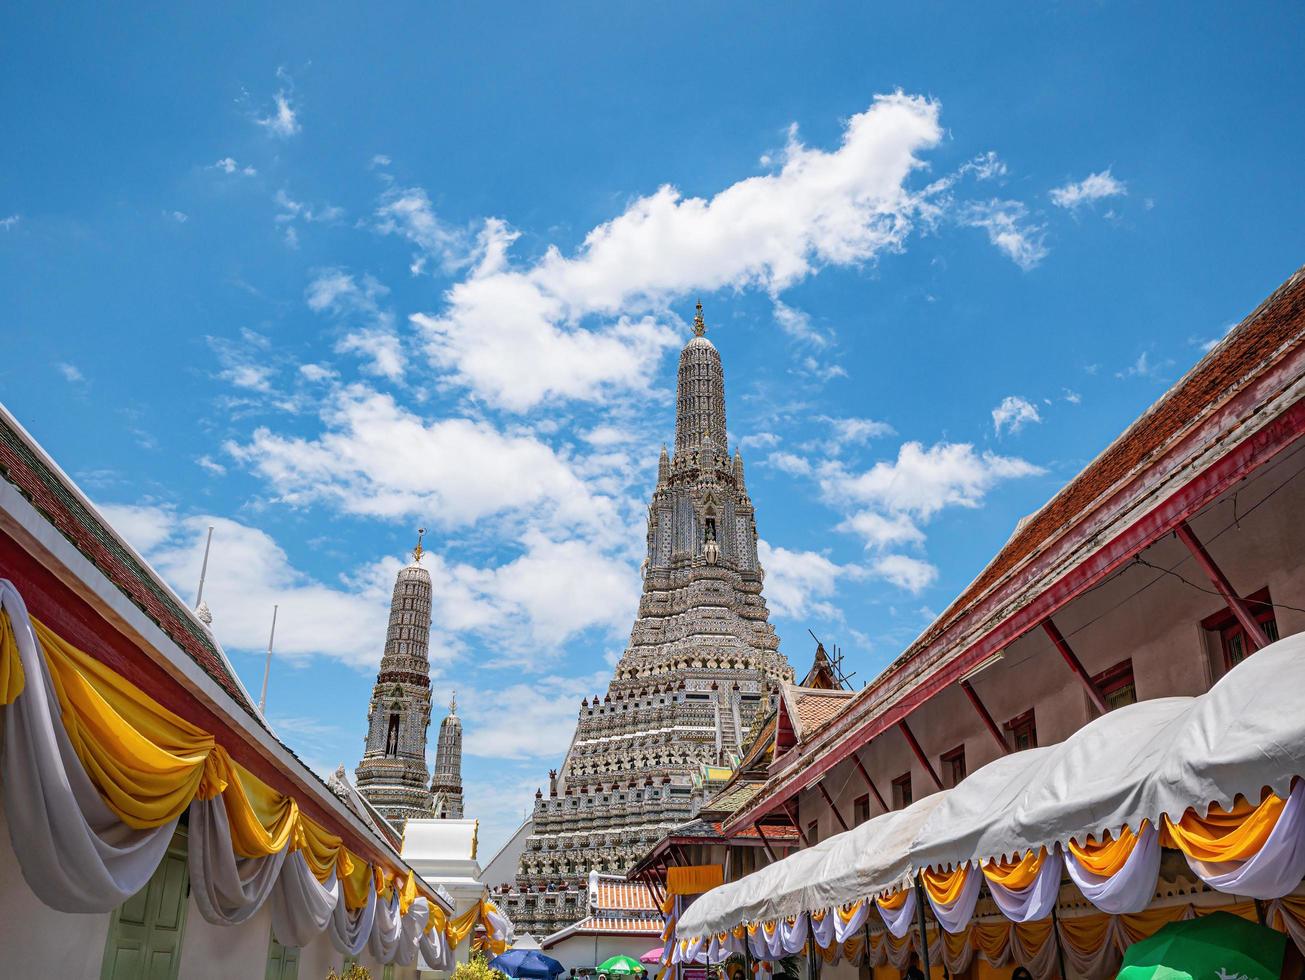 Wat Arun, locally known as Wat Chaeng, is a landmark temple on the west Thonburi bank of the Chao Phraya river photo